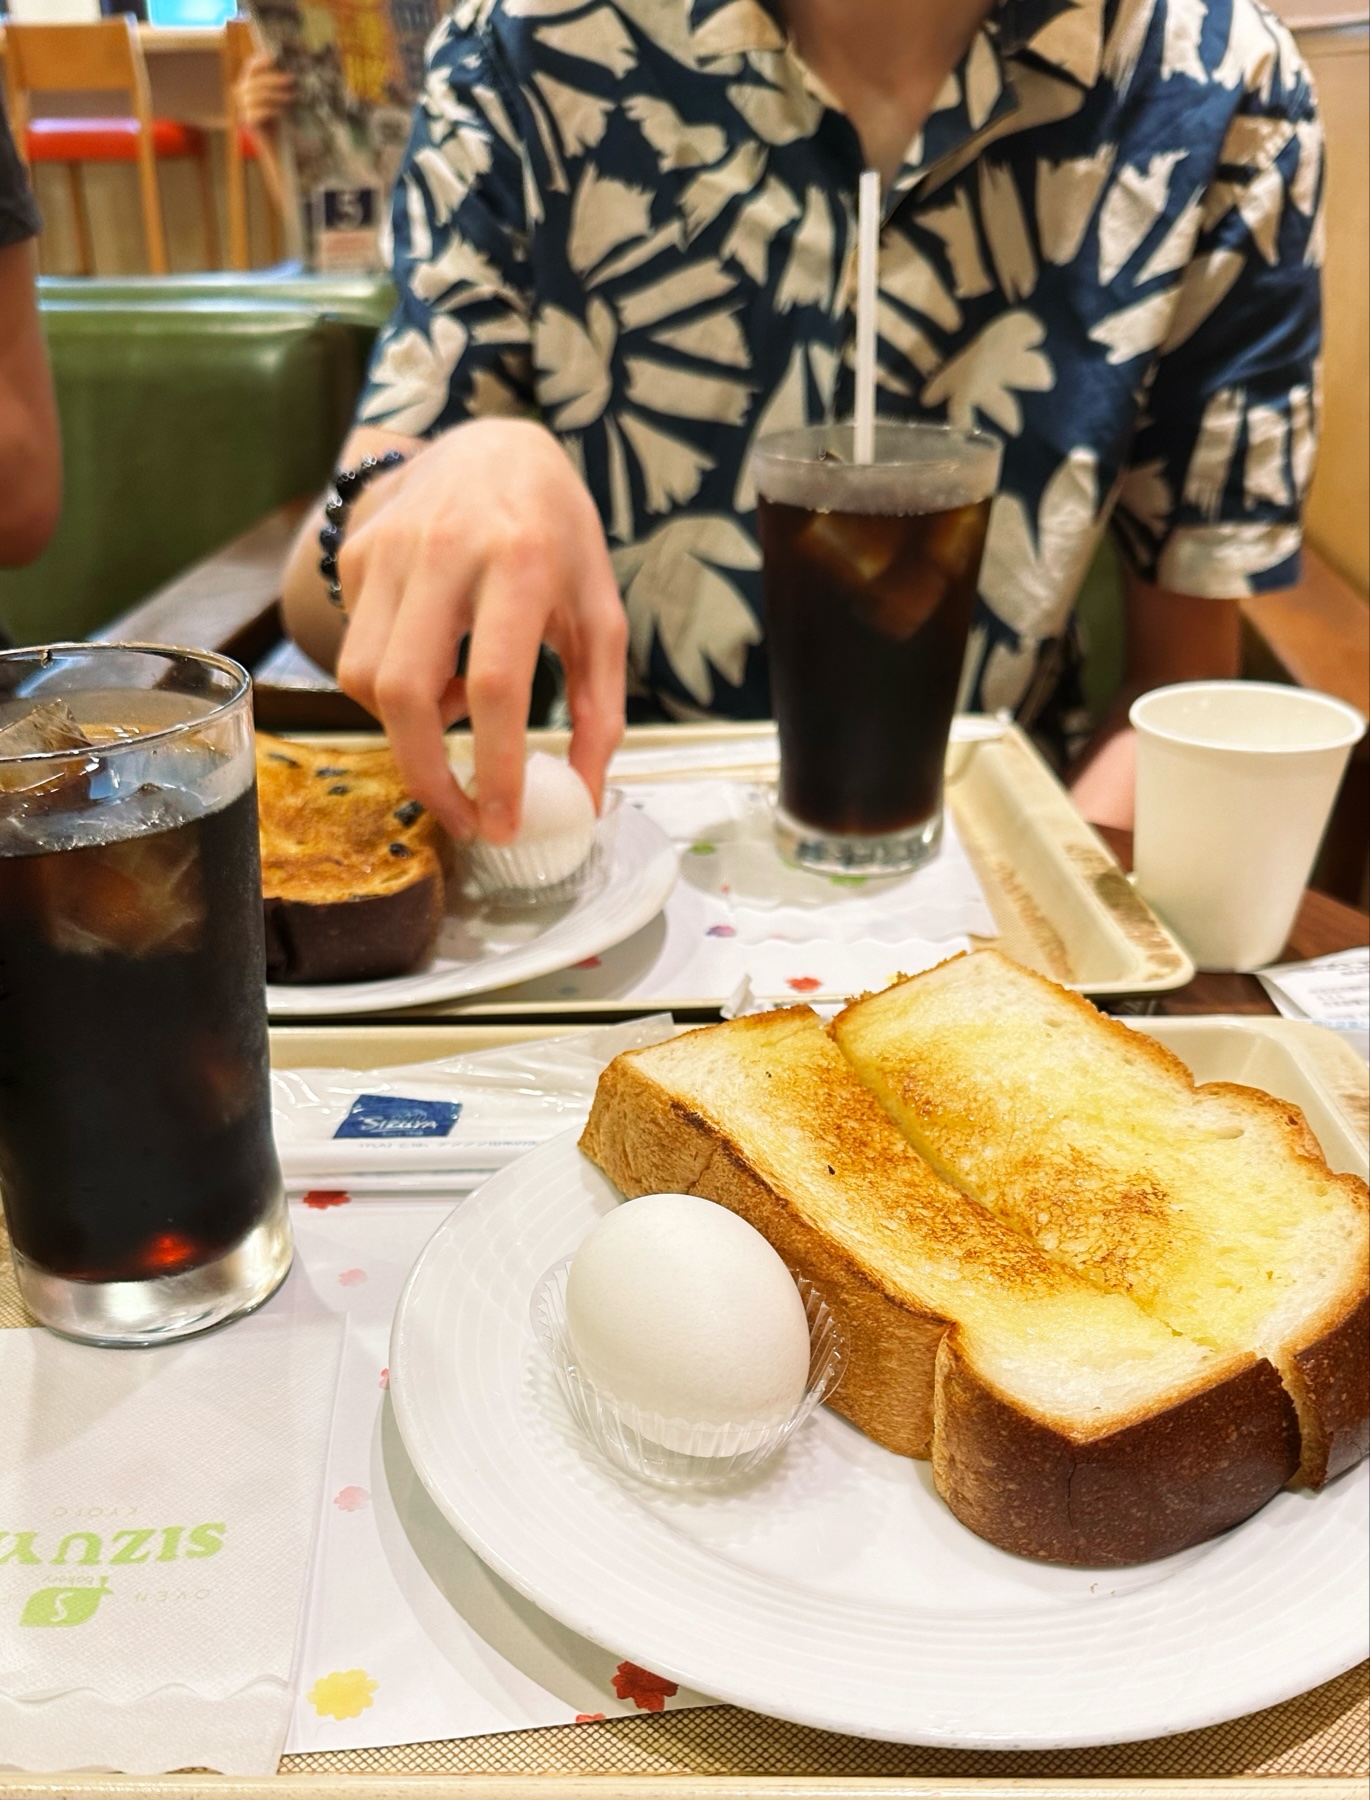 A breakfast plate with thick white toast and a hard boiled egg